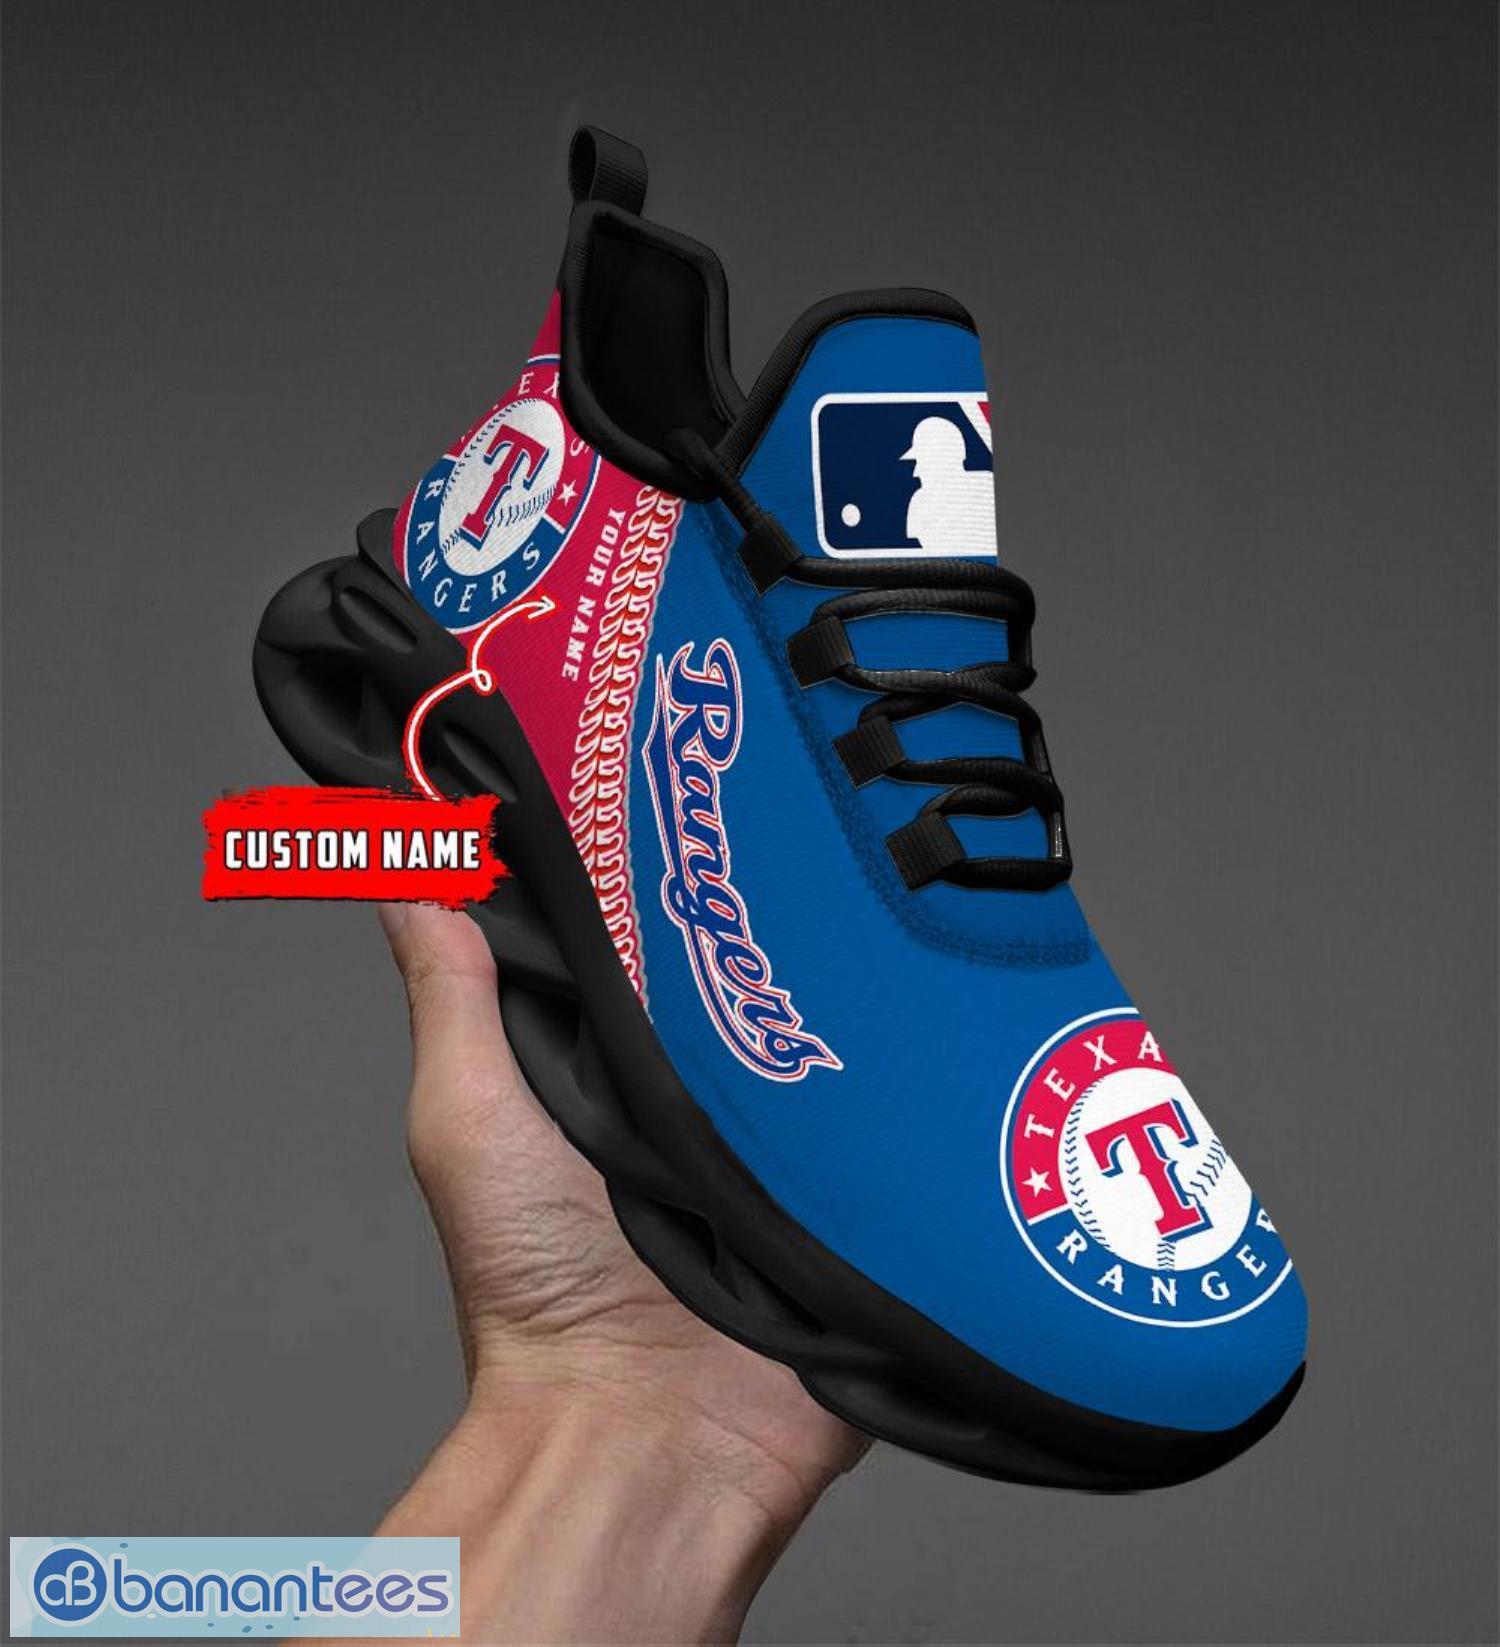 Texas Rangers Design Max Soul Shoes For Men And Women - Banantees